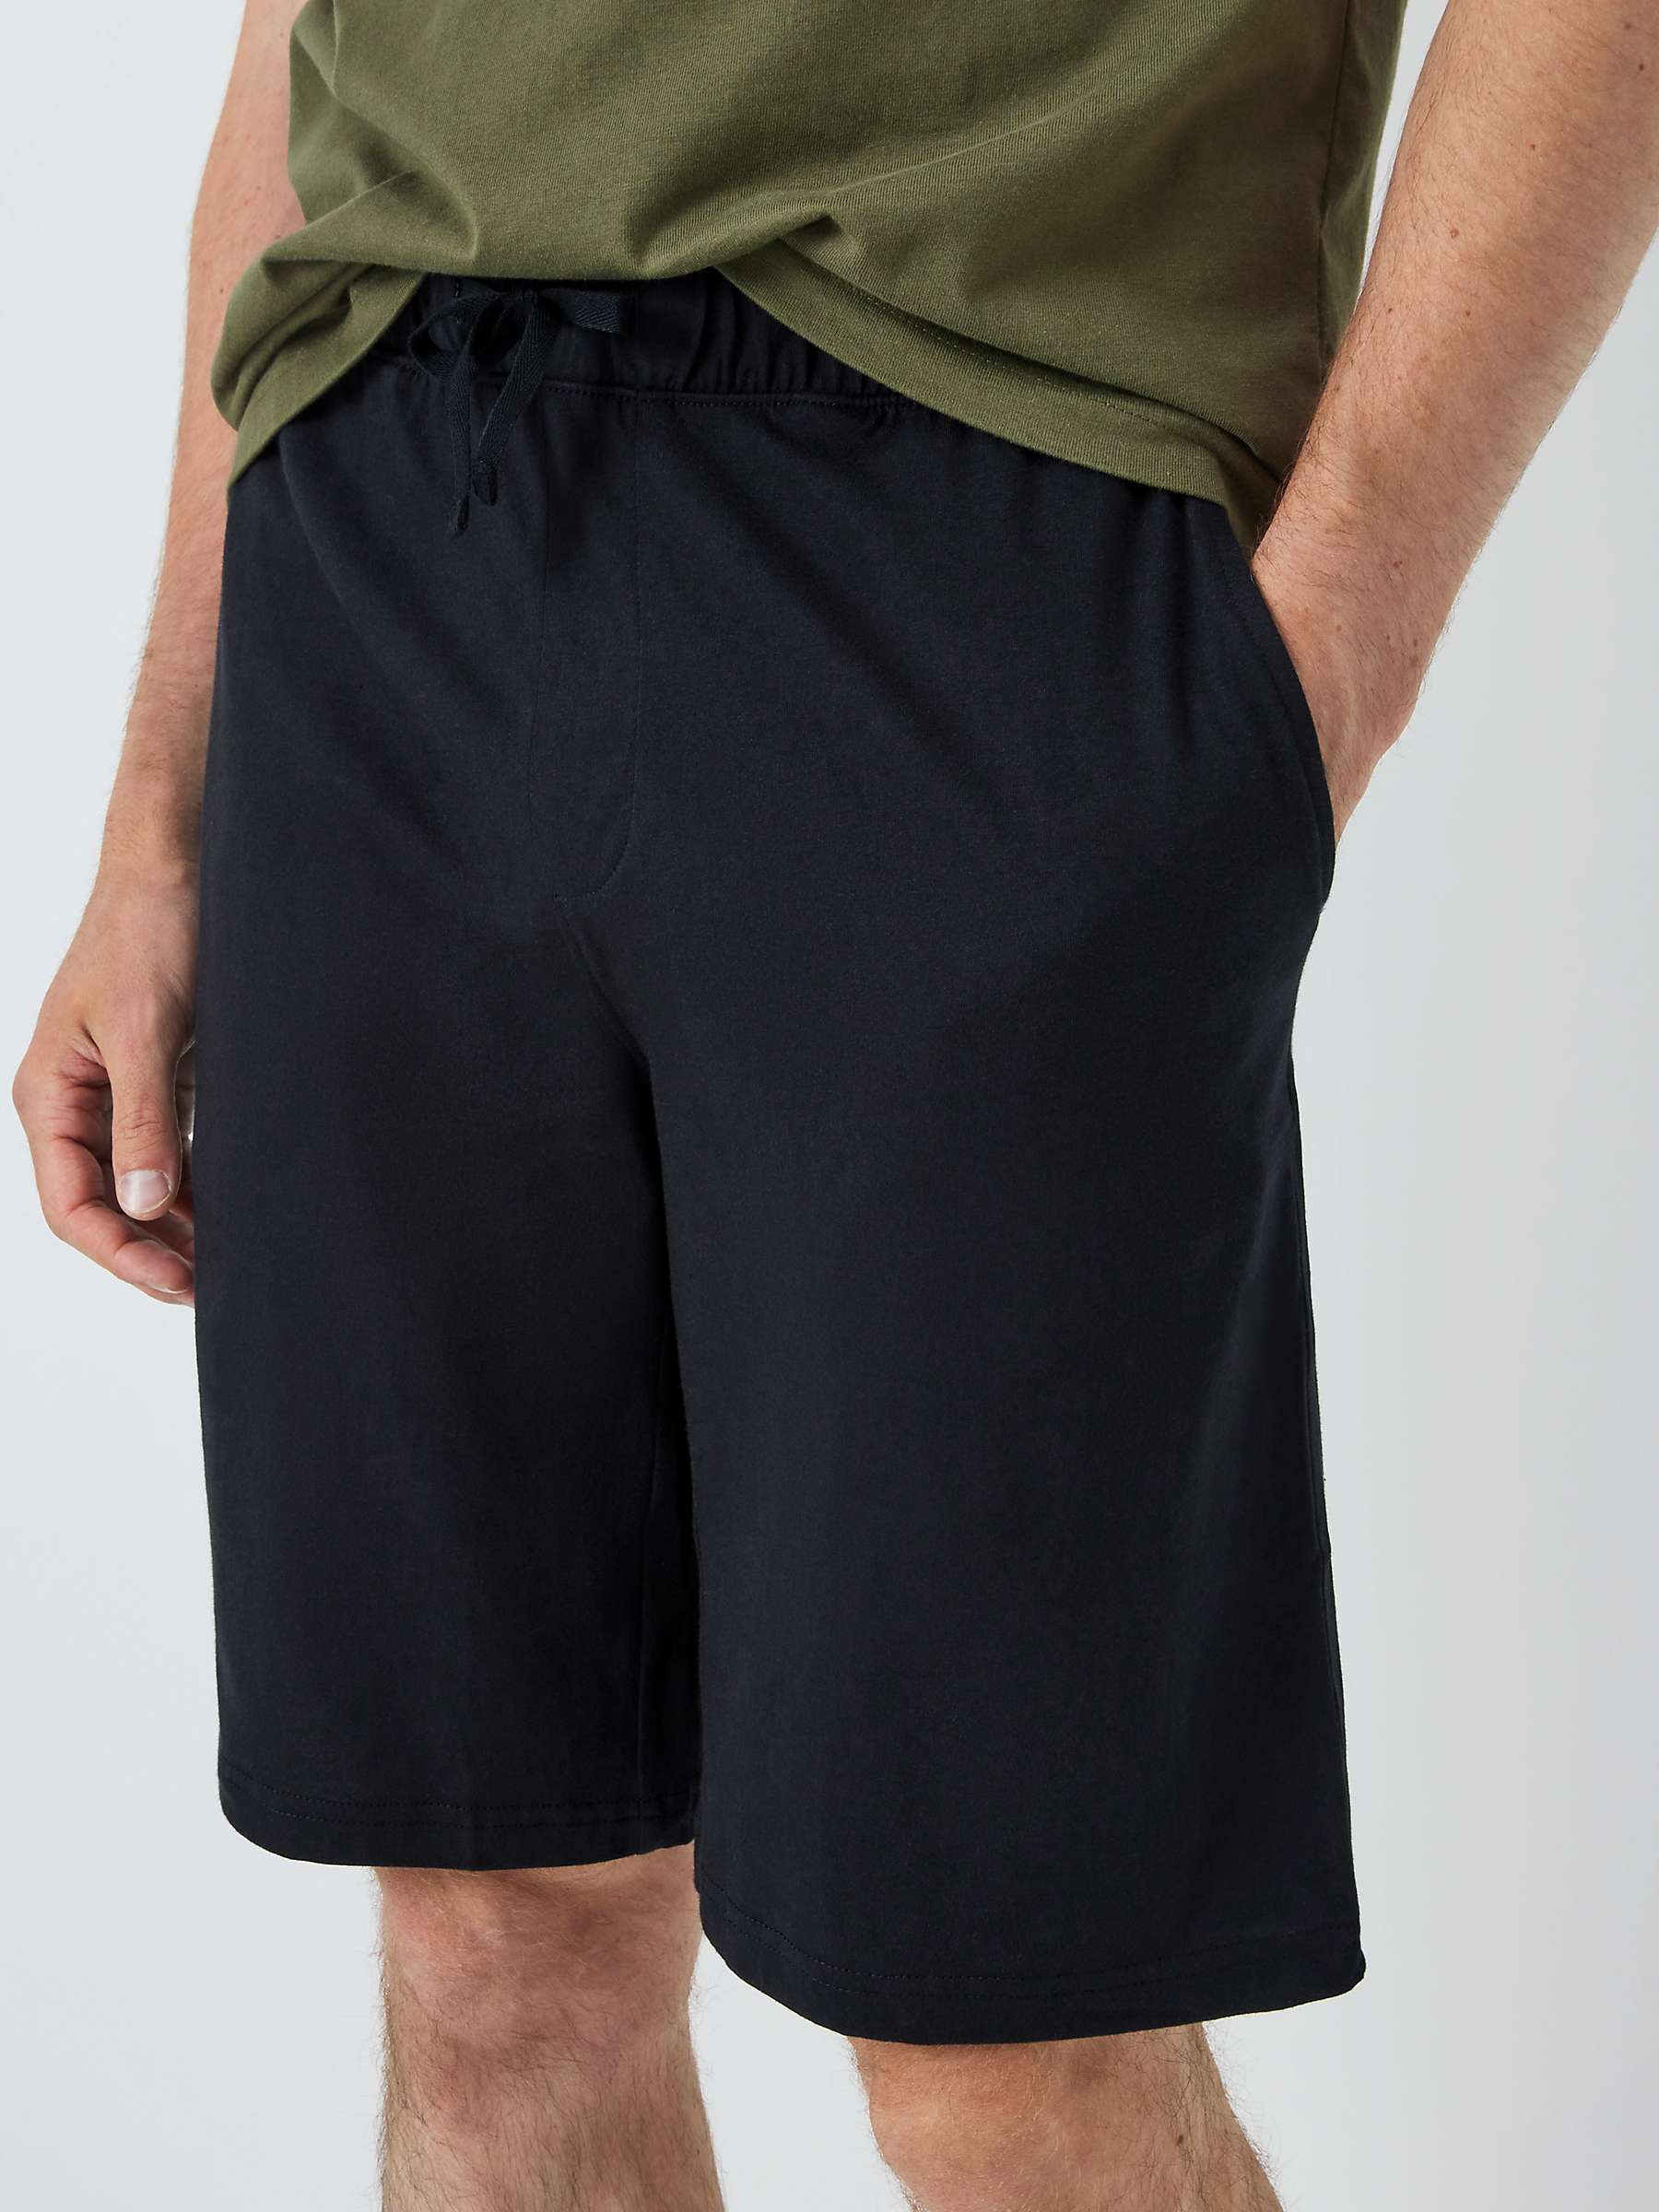 Buy John Lewis ANYDAY Cotton Jersey Shorts, Pack of 2, Black/Grey Online at johnlewis.com